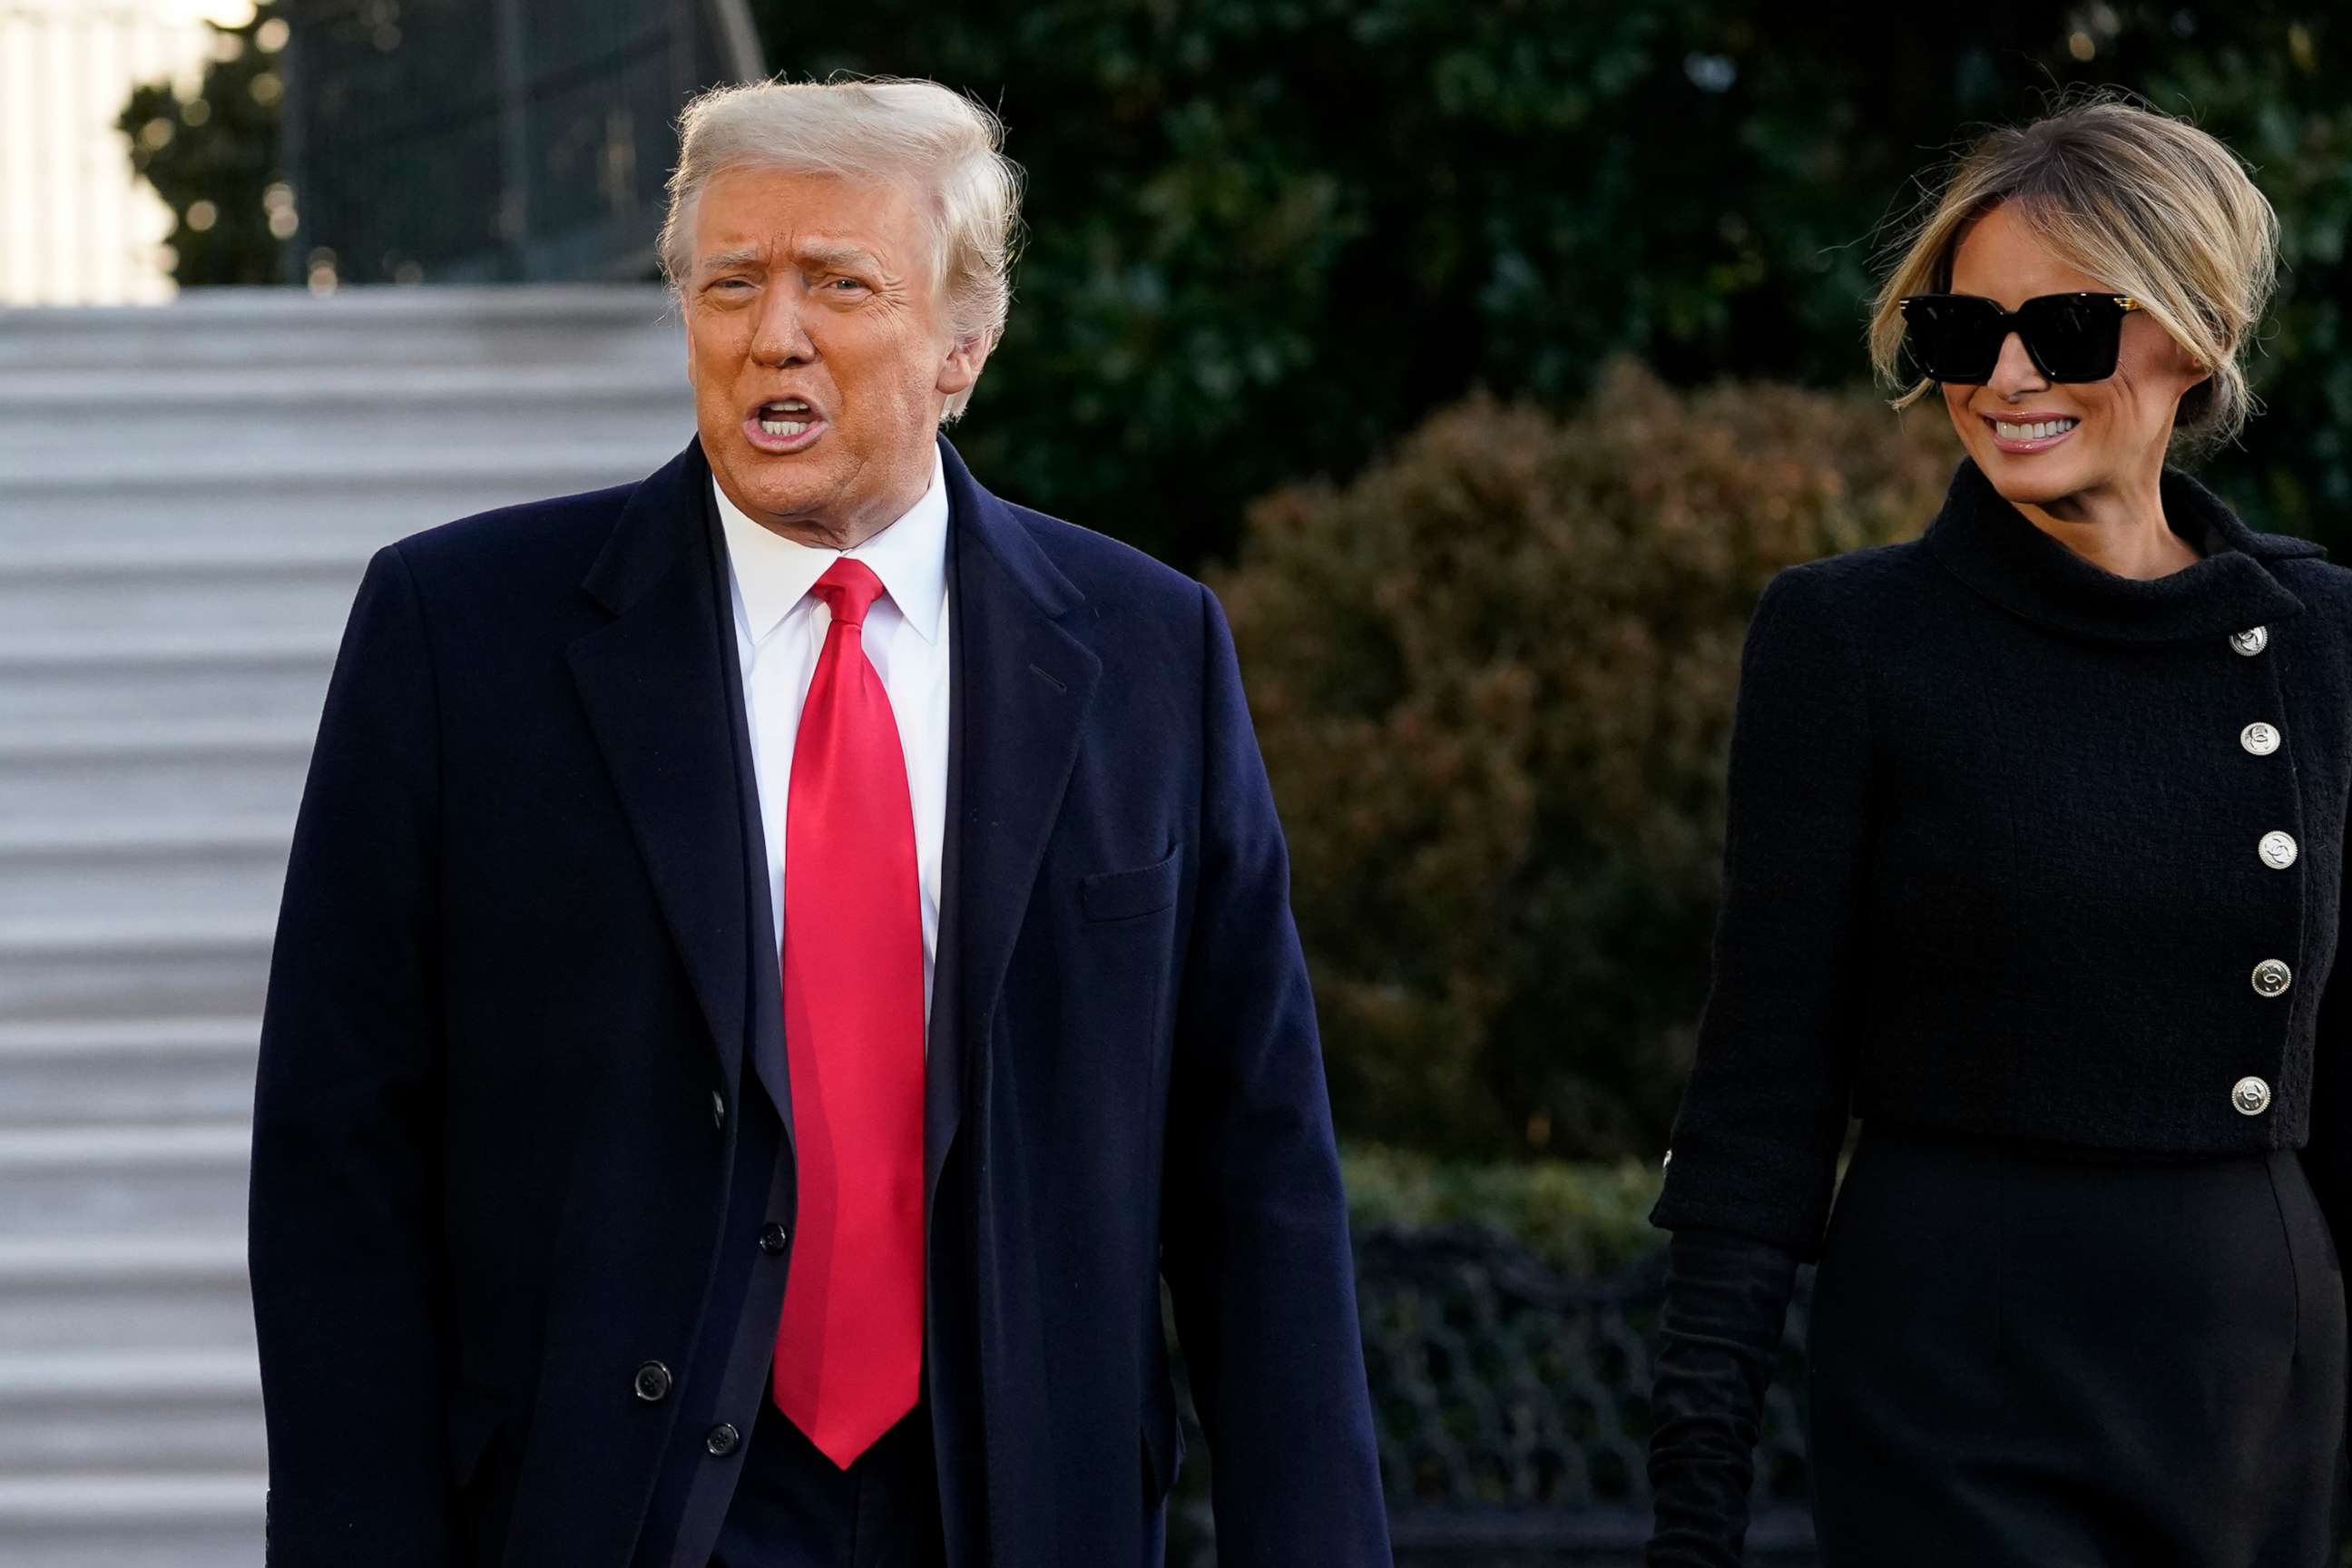 PHOTO: President Donald Trump and first lady Melania Trump stop to talk with the media as they walk to board Marine One on the South Lawn of the White House,Jan. 20, 2021, in Washington.